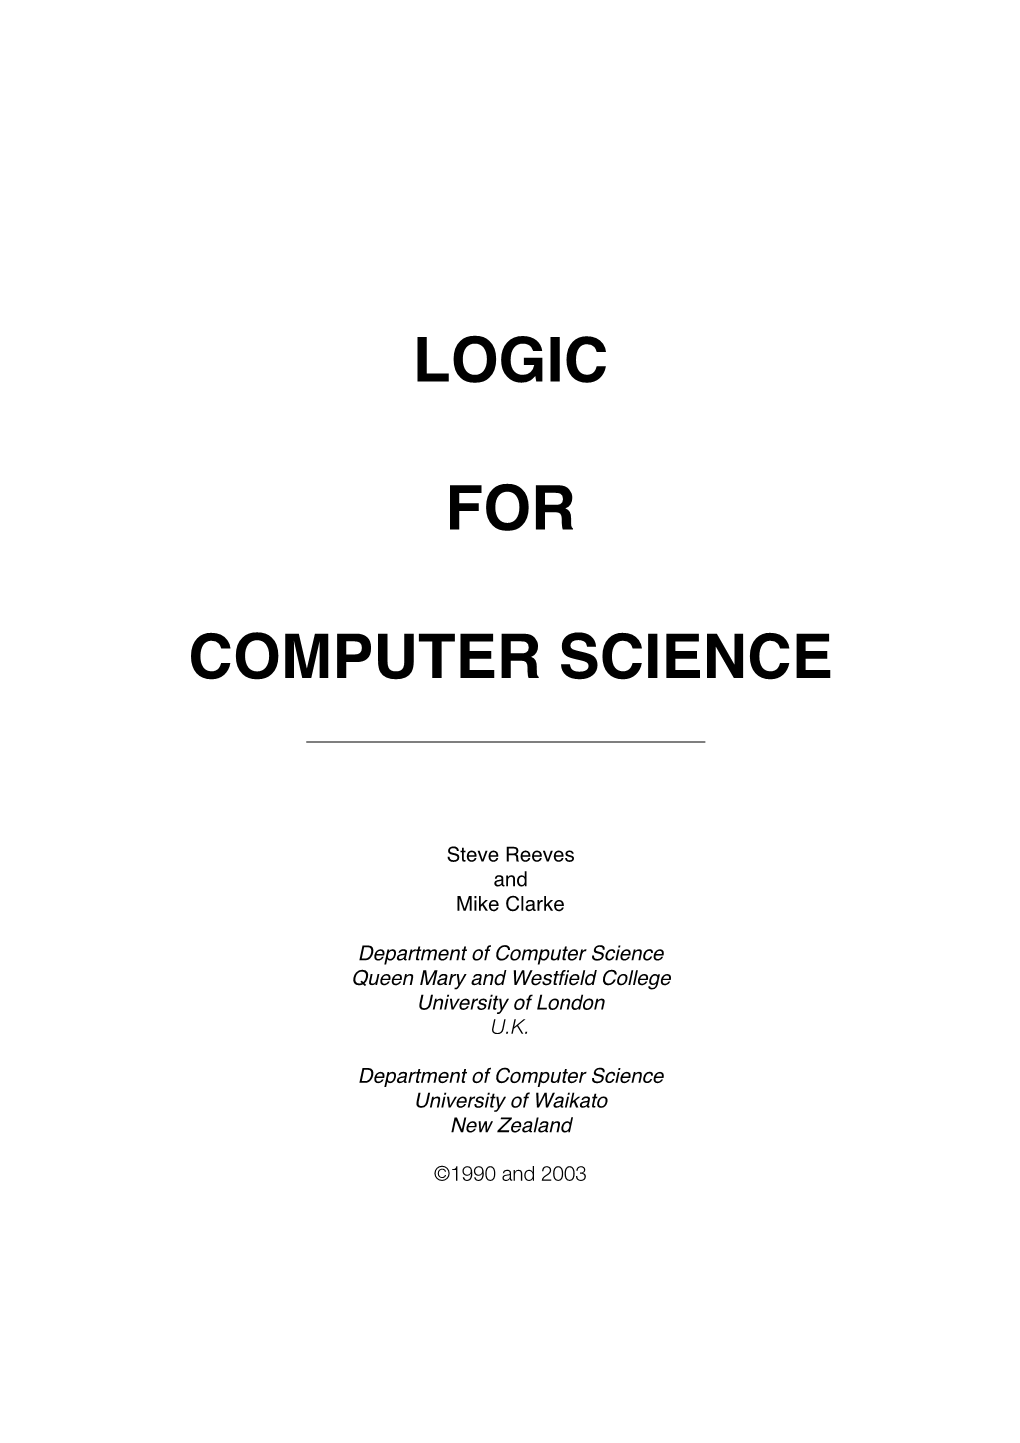 Logic for Computer Science Does Not Represent an Opportunity to Make Monetary Profits